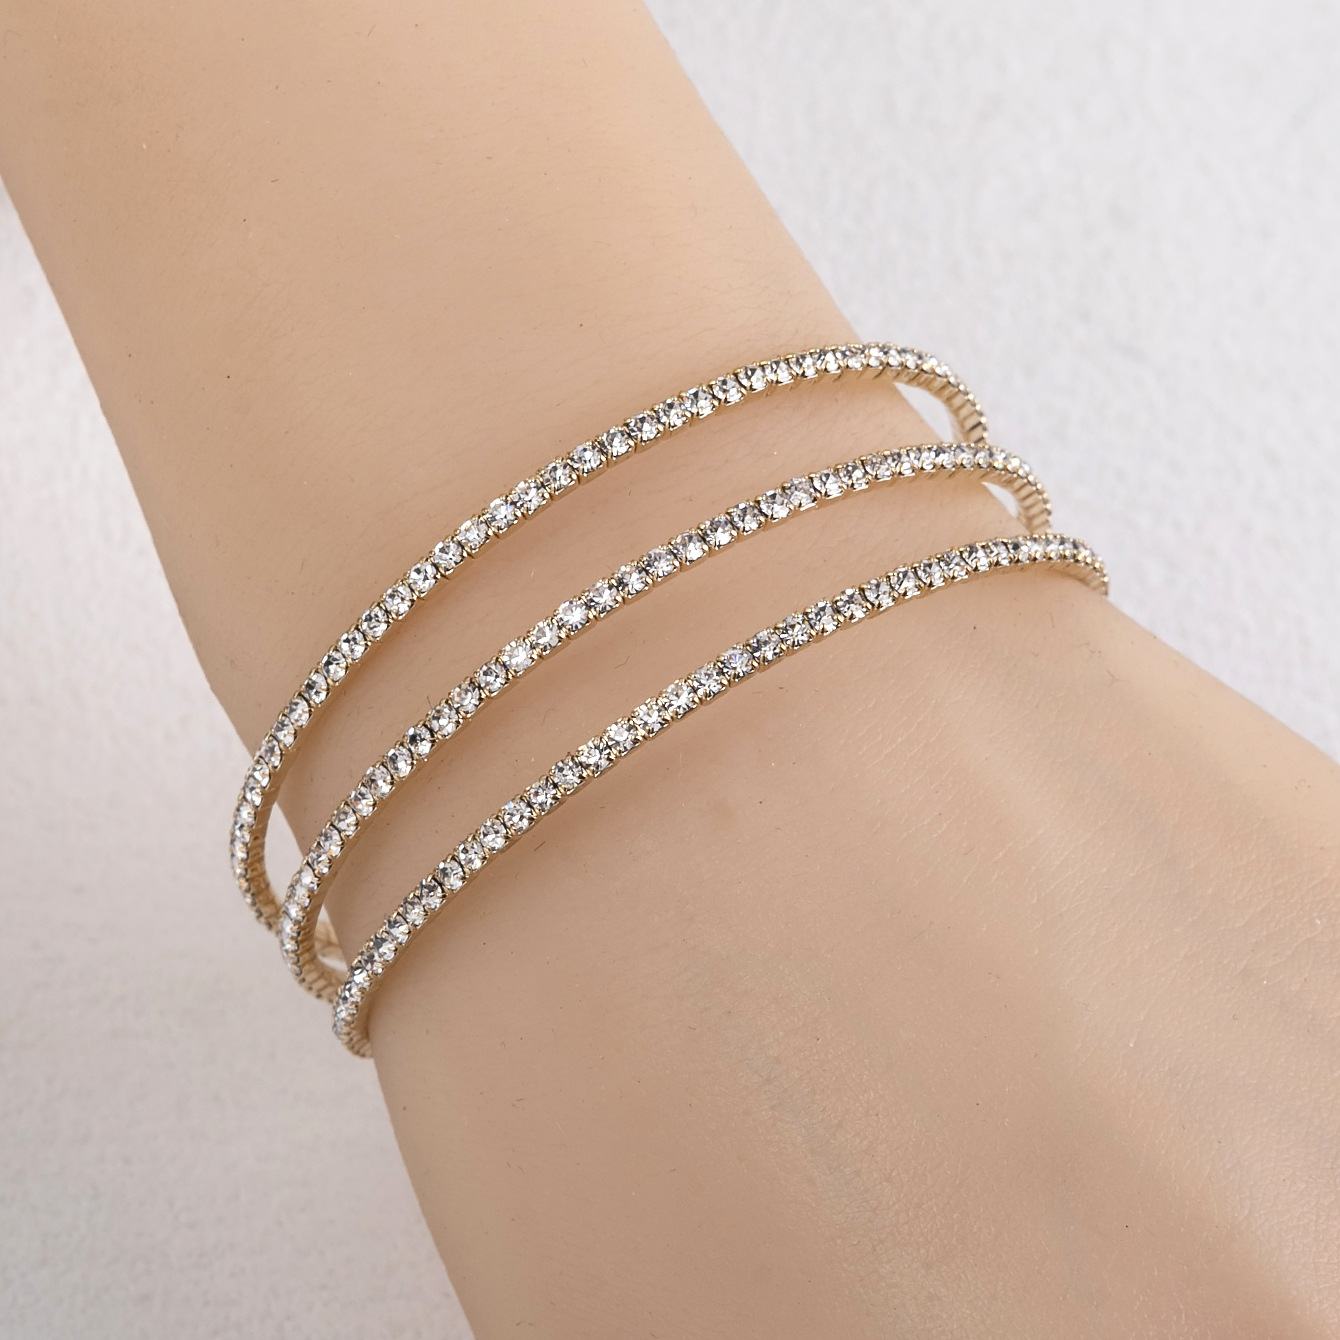 Ins Style 3 Rows Elastic Steel Wire Rhinestone Open-Ended Bracelet Europe and America Cross Border Simple Multi-Layer Claw Chain Light Luxury Women's Bracelet